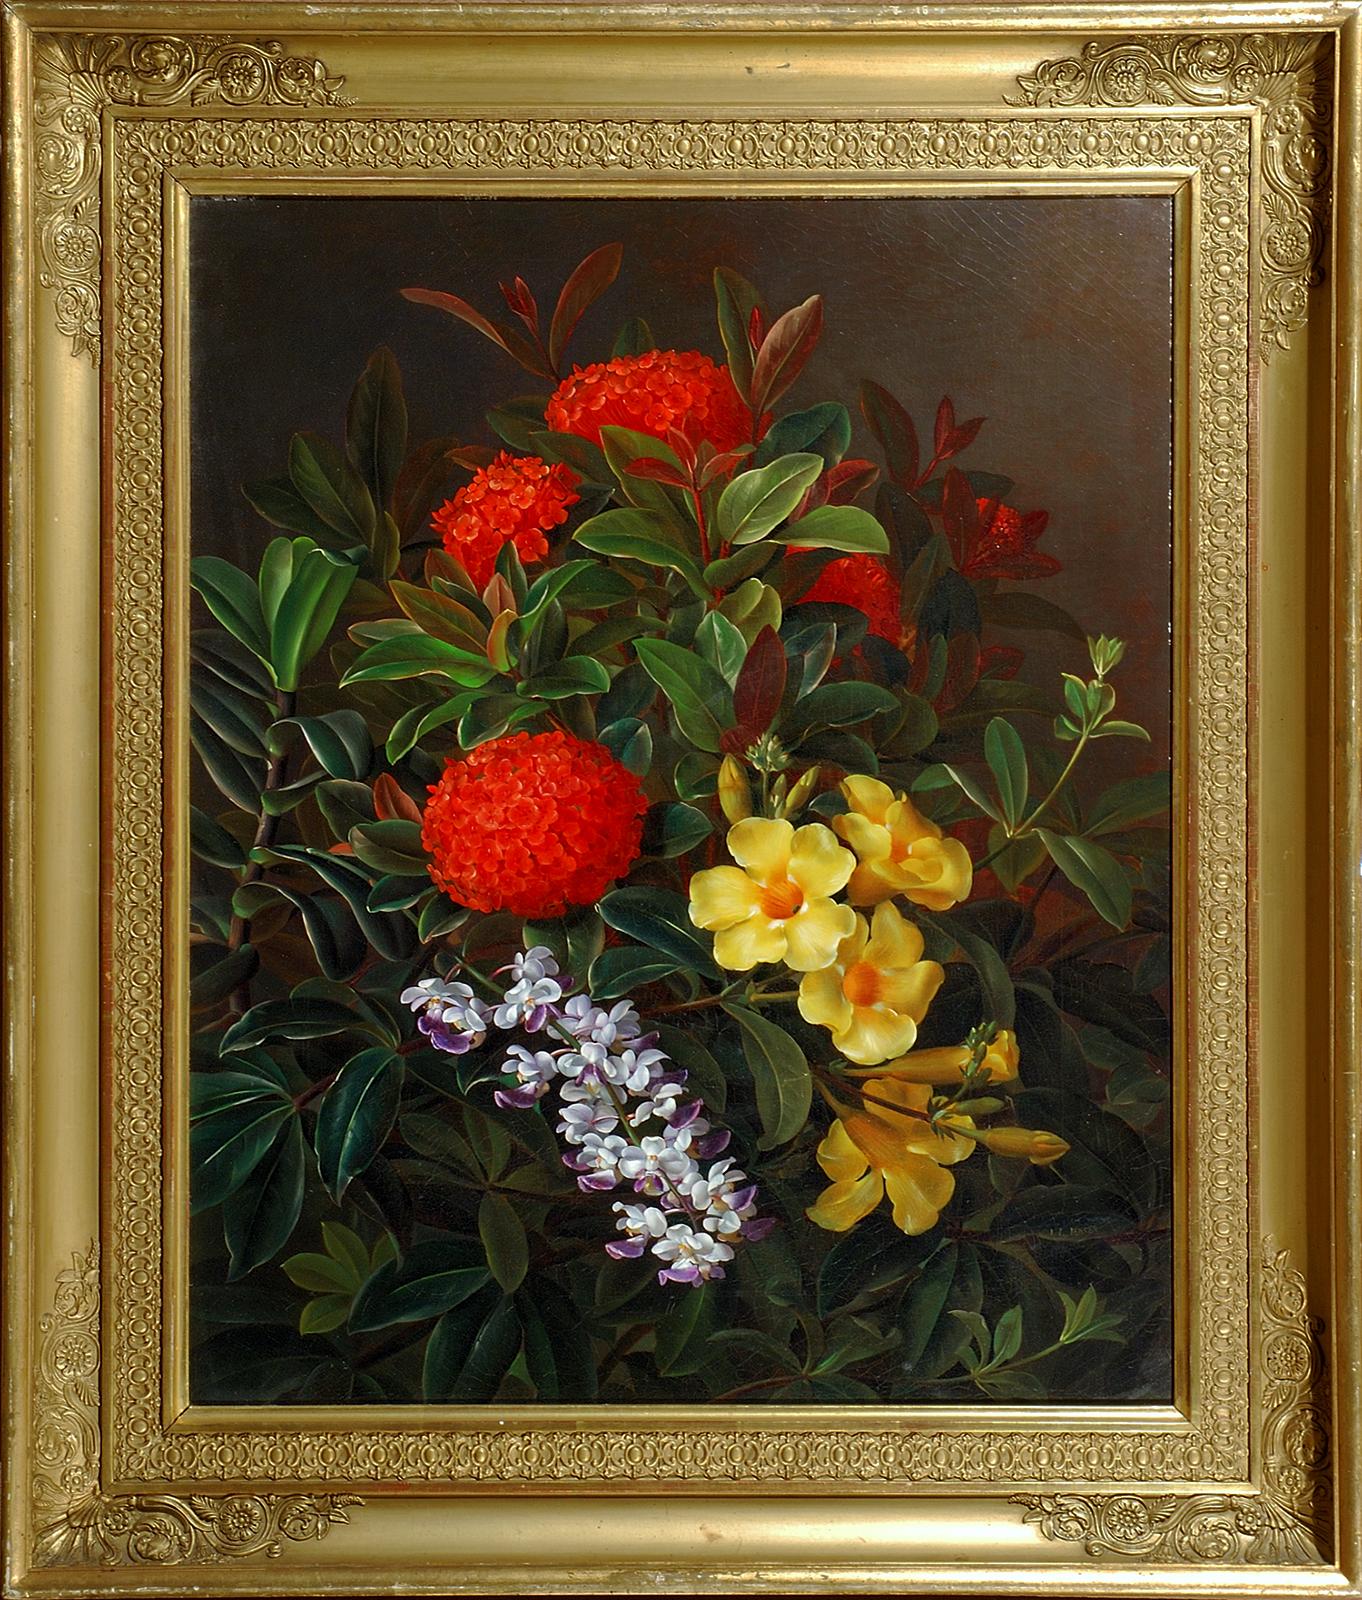 Johan Laurentz Jensen was the leading painter of floral still lifes in Denmark in the first half of the nineteenth century. As a young man, he studied at the Royal Copenhagen Academy under Christoffer-Wilhelm Eckersberg and C.D. Fritzsch.  In 1821,